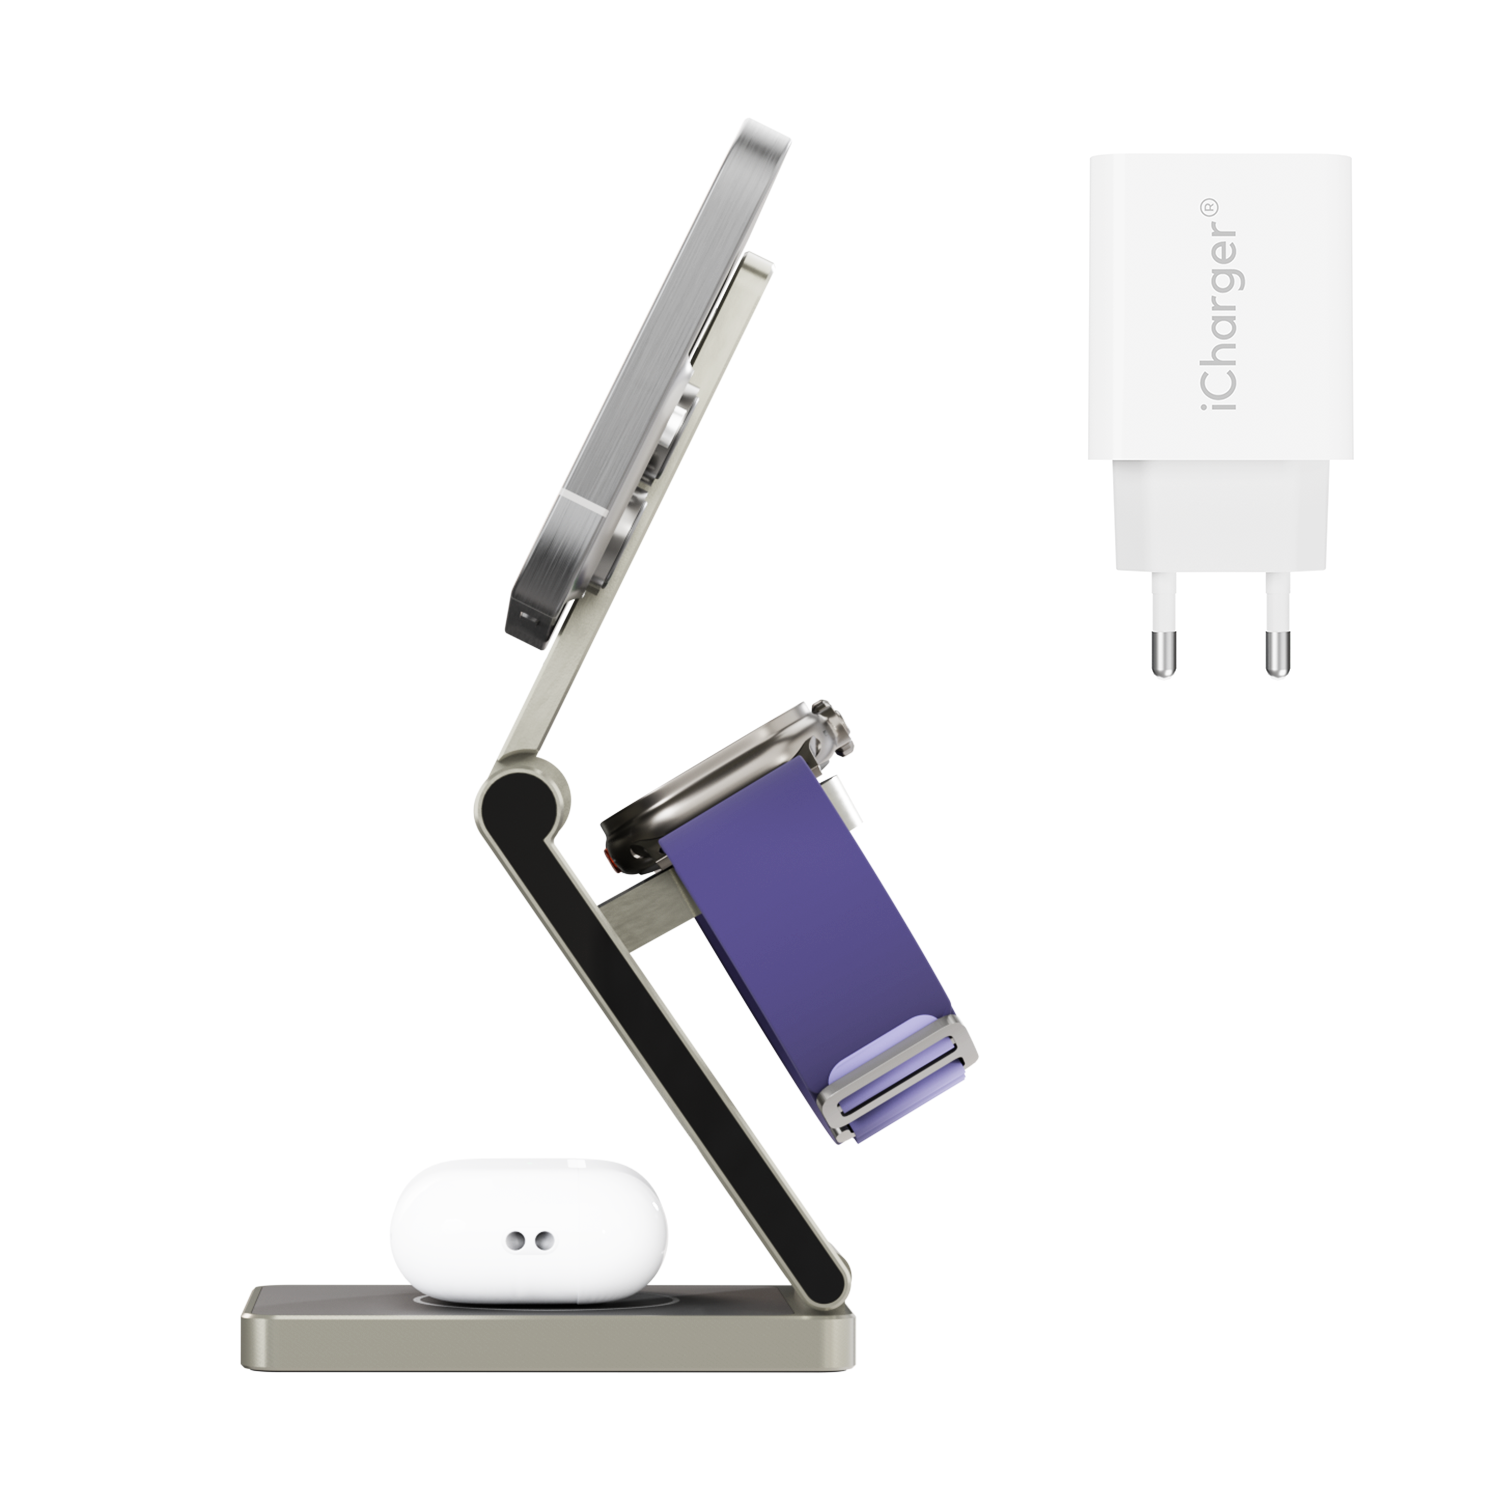 Versatile iCharger MagSafe Hybrid Pro wireless charging station with a 25W power adapter, providing fast, efficient charging for Apple and Samsung devices in a sleek, foldable design.